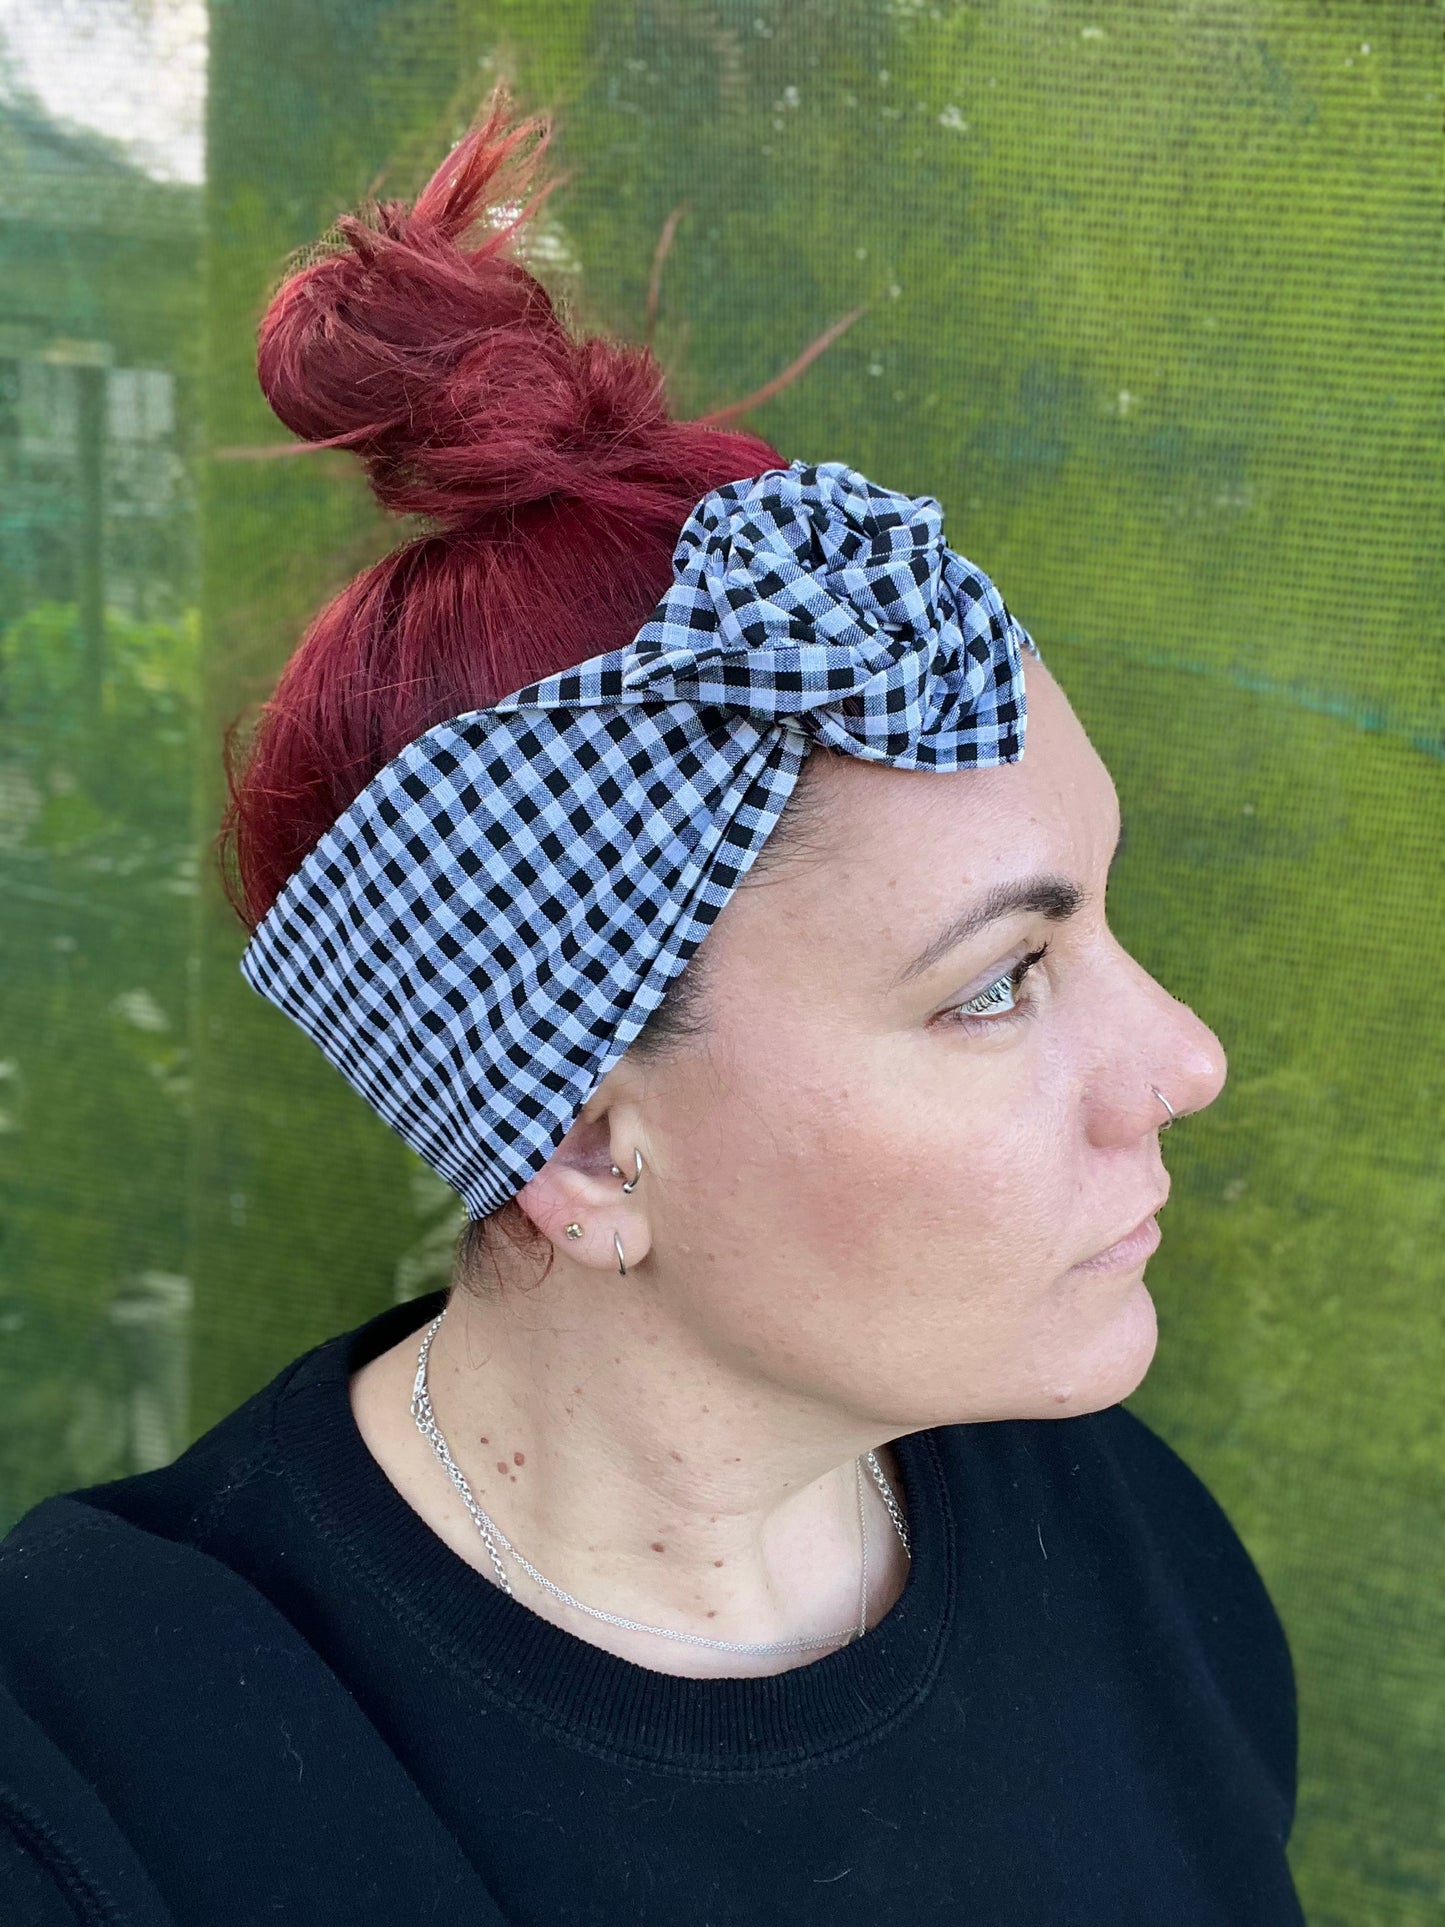 Black & White Gingham Boho Wire Headband - Bae Bands Australia Twist Bow Wire Headband allows for your headband to stay in place all day with no headaches,